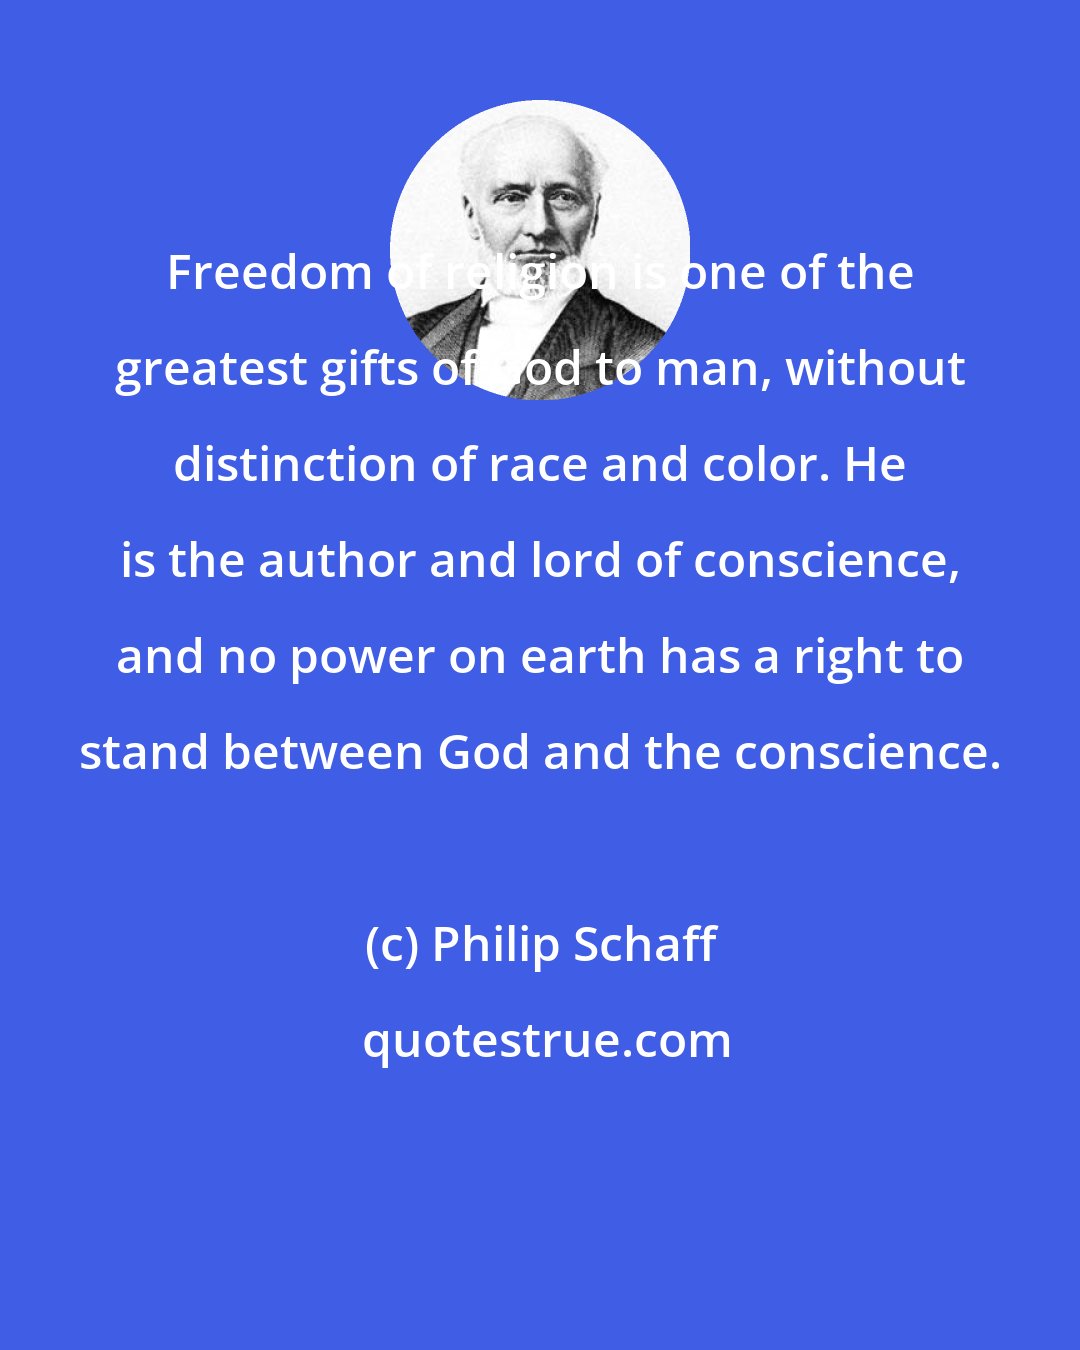 Philip Schaff: Freedom of religion is one of the greatest gifts of God to man, without distinction of race and color. He is the author and lord of conscience, and no power on earth has a right to stand between God and the conscience.